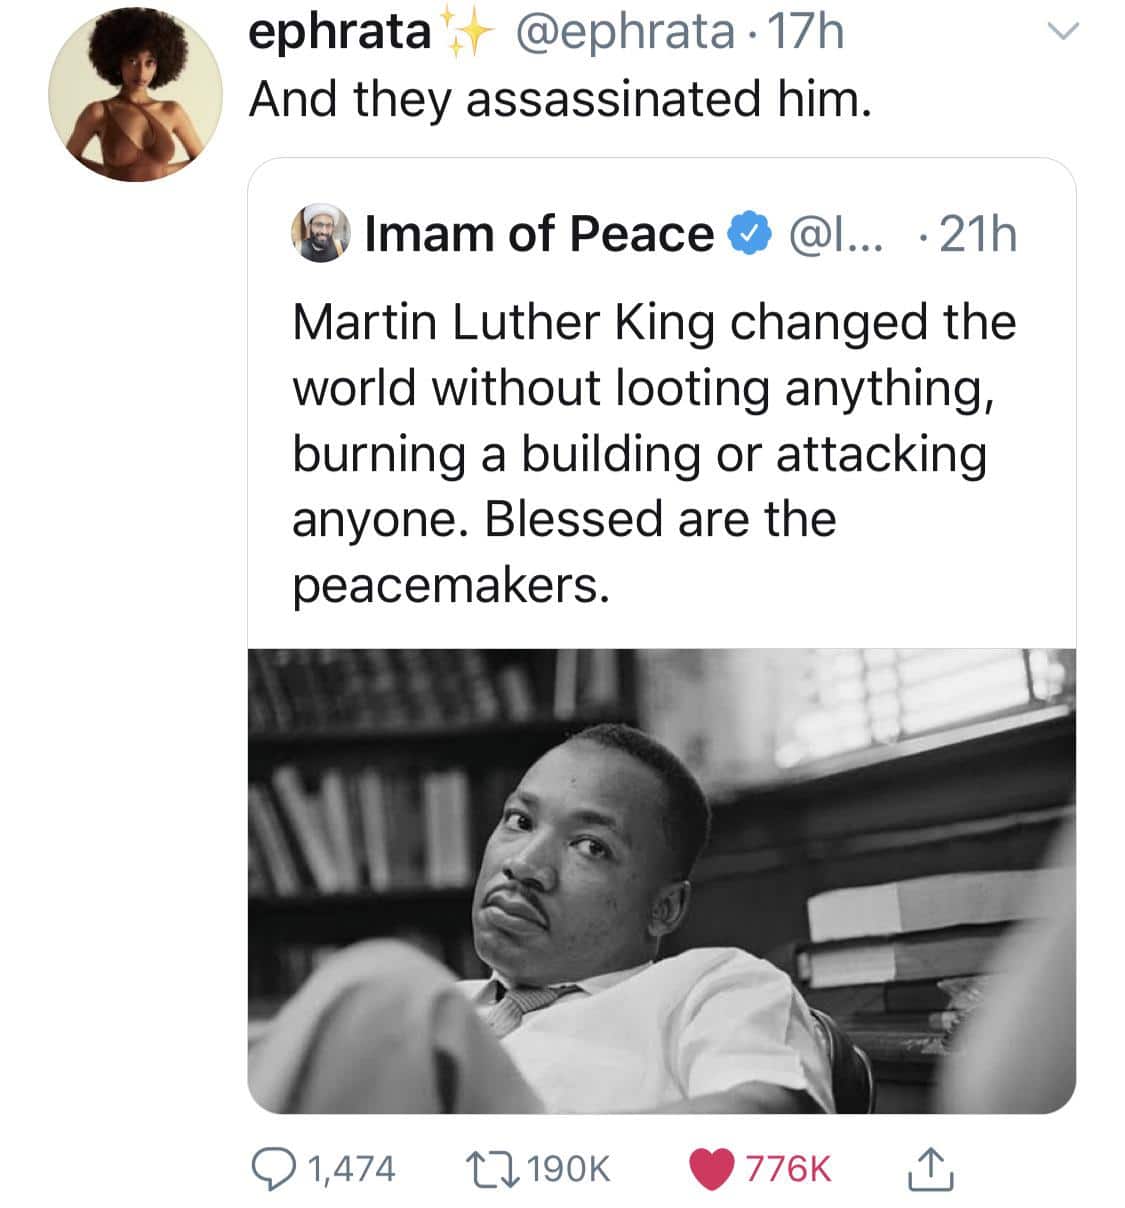 Tweets, MLK, Malcolm, Negroes, Negro, Muslim Black Twitter Memes Tweets, MLK, Malcolm, Negroes, Negro, Muslim text: ephrata @ephrata 17h And they assassinated him. e .21h Imam of Peace Martin Luther King changed the world without looting anything, burning a building or attacking anyone. Blessed are the peacemakers. Nut Q 1,474 CO 190K 776K 